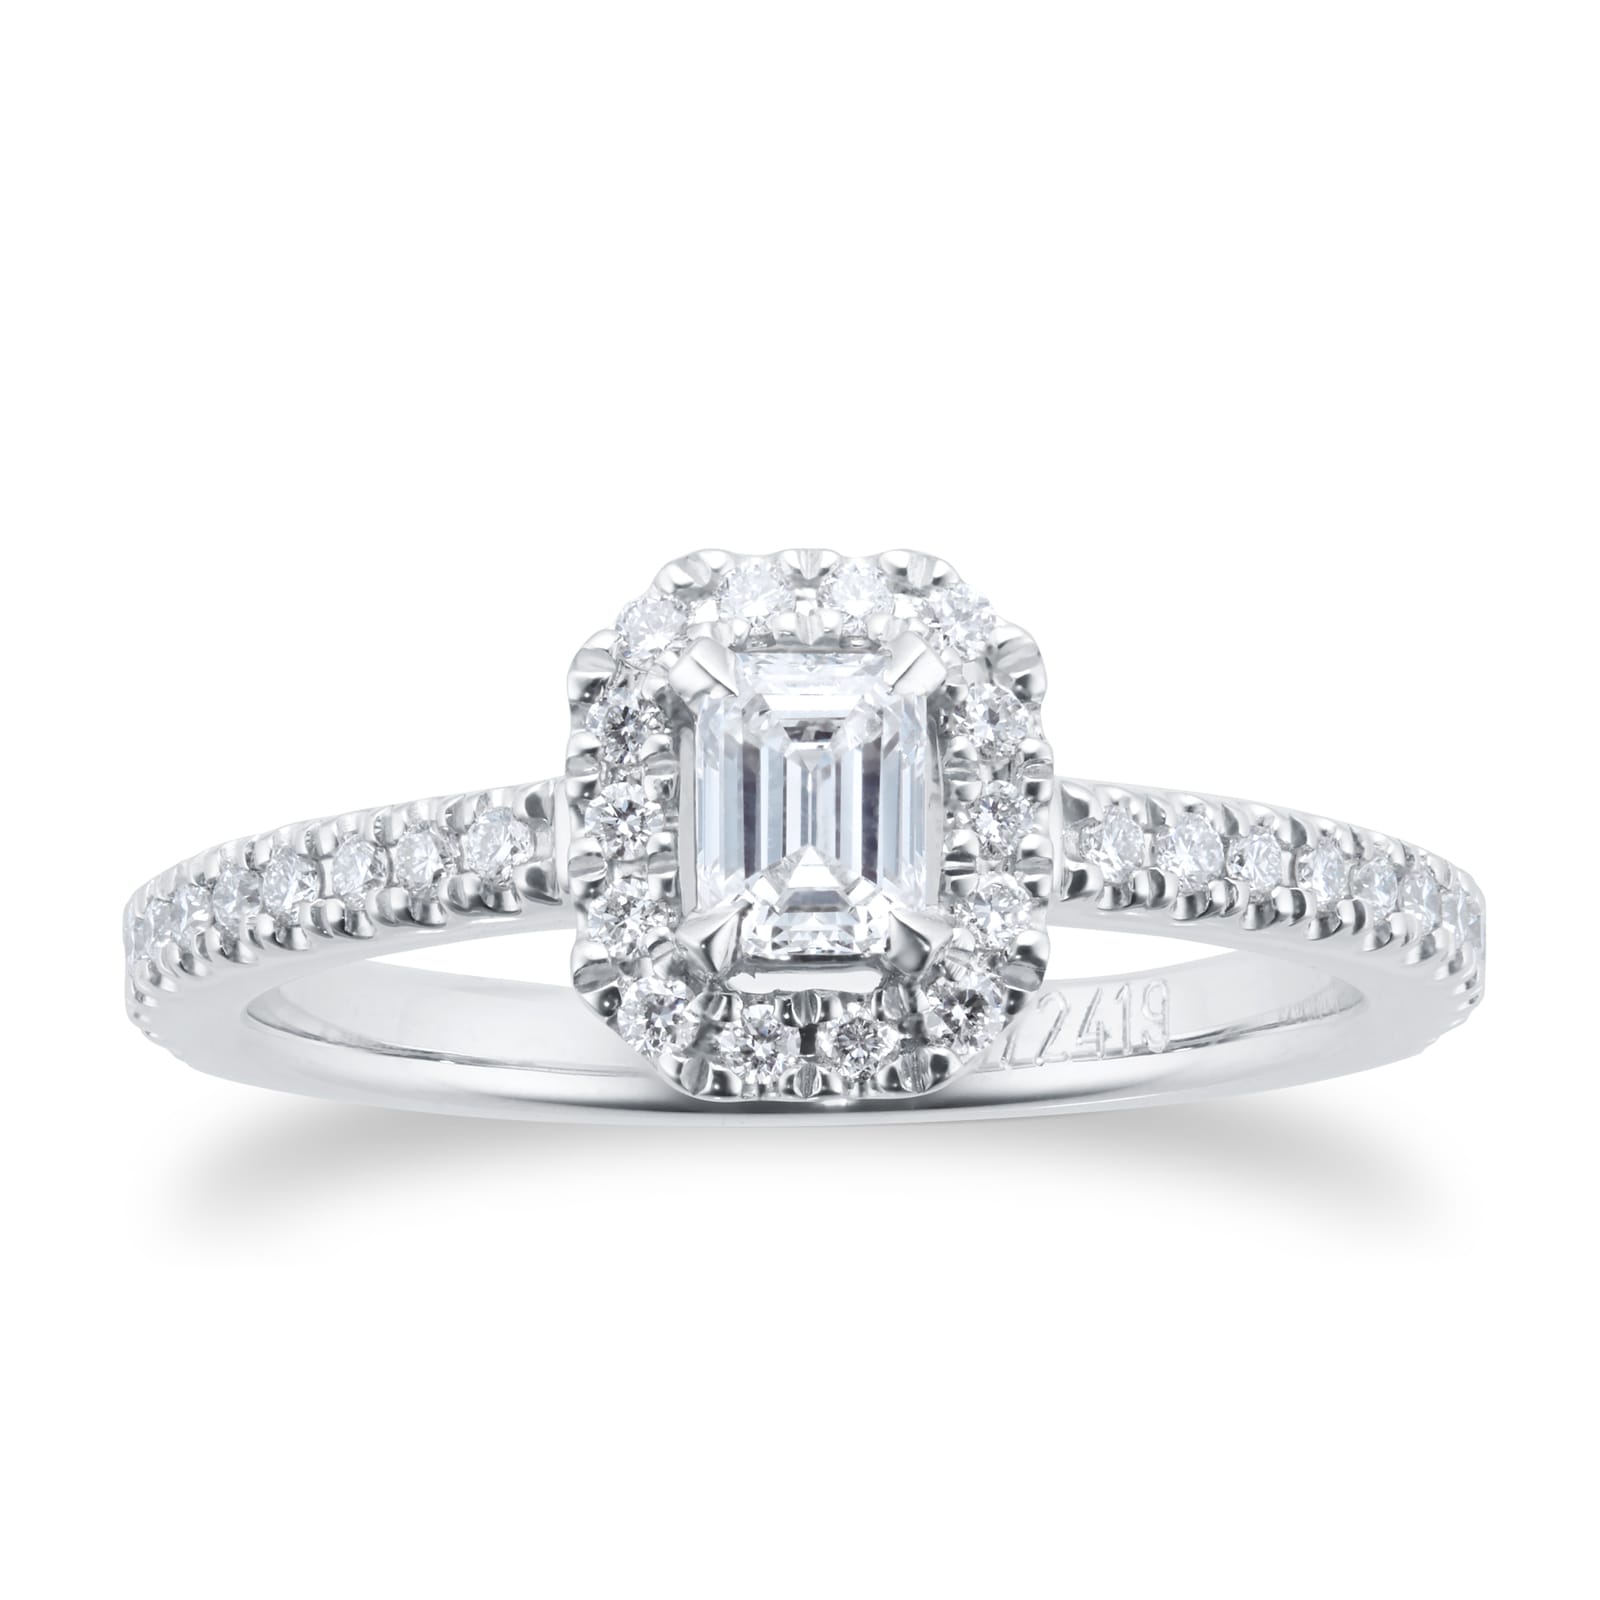 Amelia Engagement Ring With Diamond Band 0.50 Carat Total Weight - Ring Size M